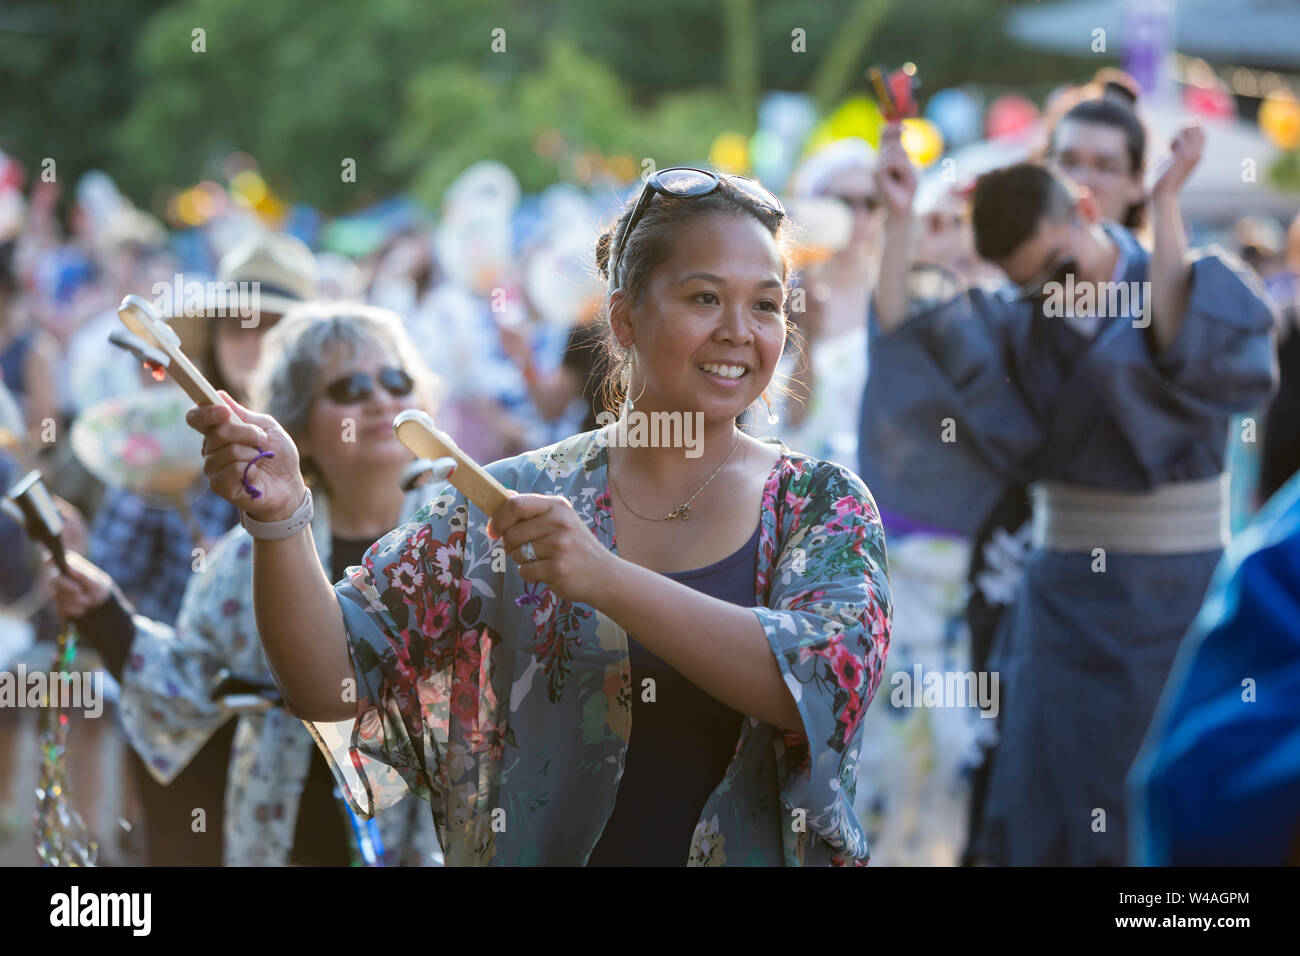 Attendees perform a Bon dance with kachi-kachi at the 87th annual Bon Odori Festival in Seattle, Washington on July 20, 2019. The lively summer festival features traditional music and folk dance to welcome the spirits of the dead and celebrate the lives of ancestors. Stock Photo